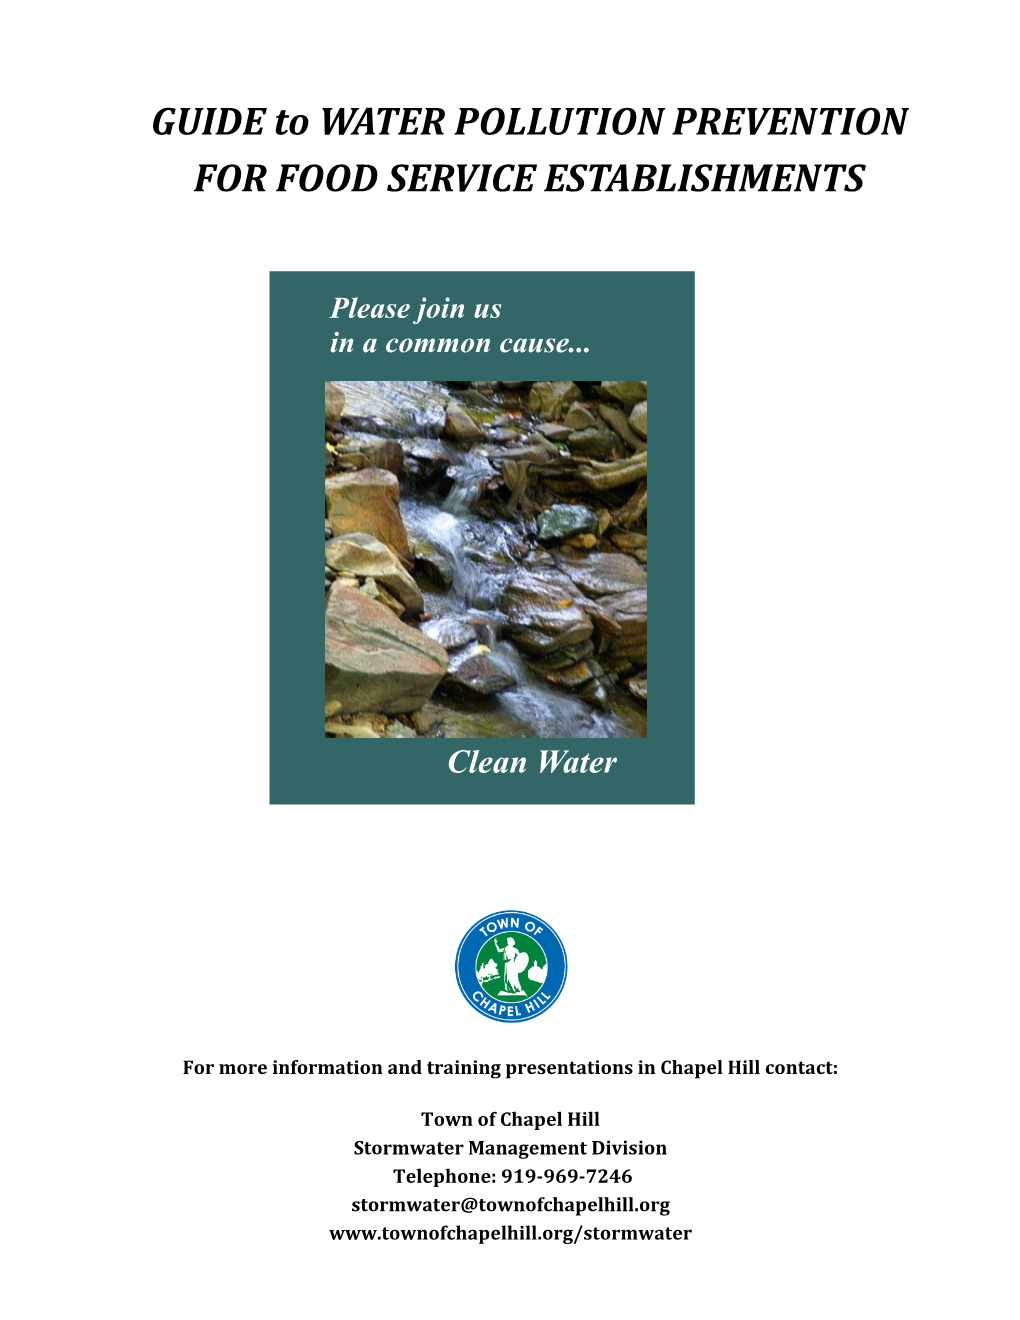 GUIDE to WATER POLLUTION PREVENTION for FOOD SERVICE ESTABLISHMENTS